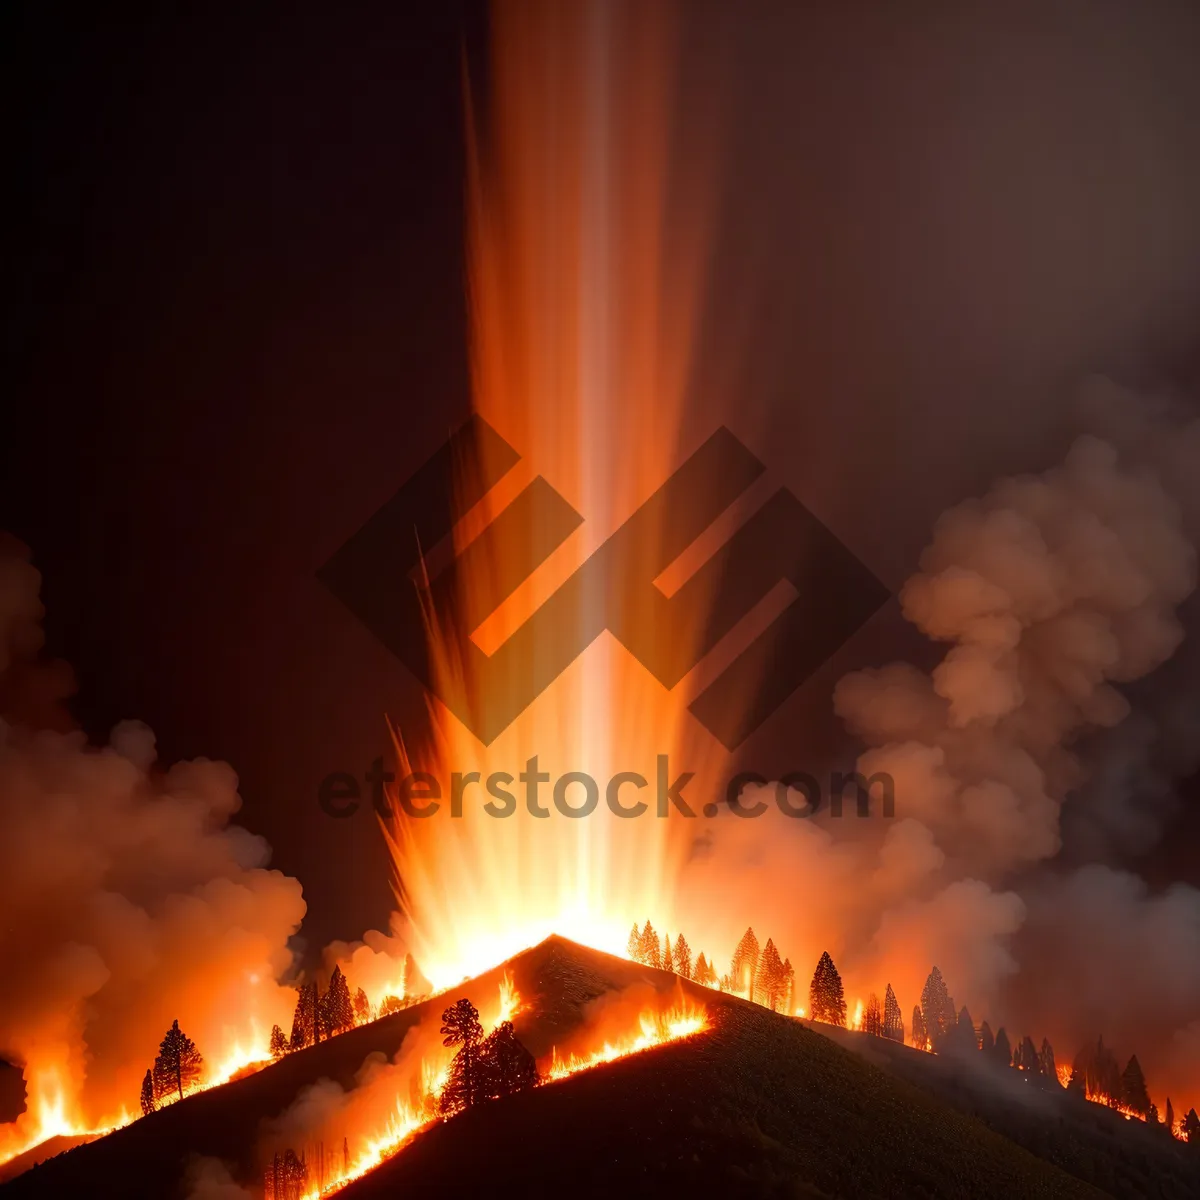 Picture of Blazing Volcanic Mountain: A Fiery Inferno